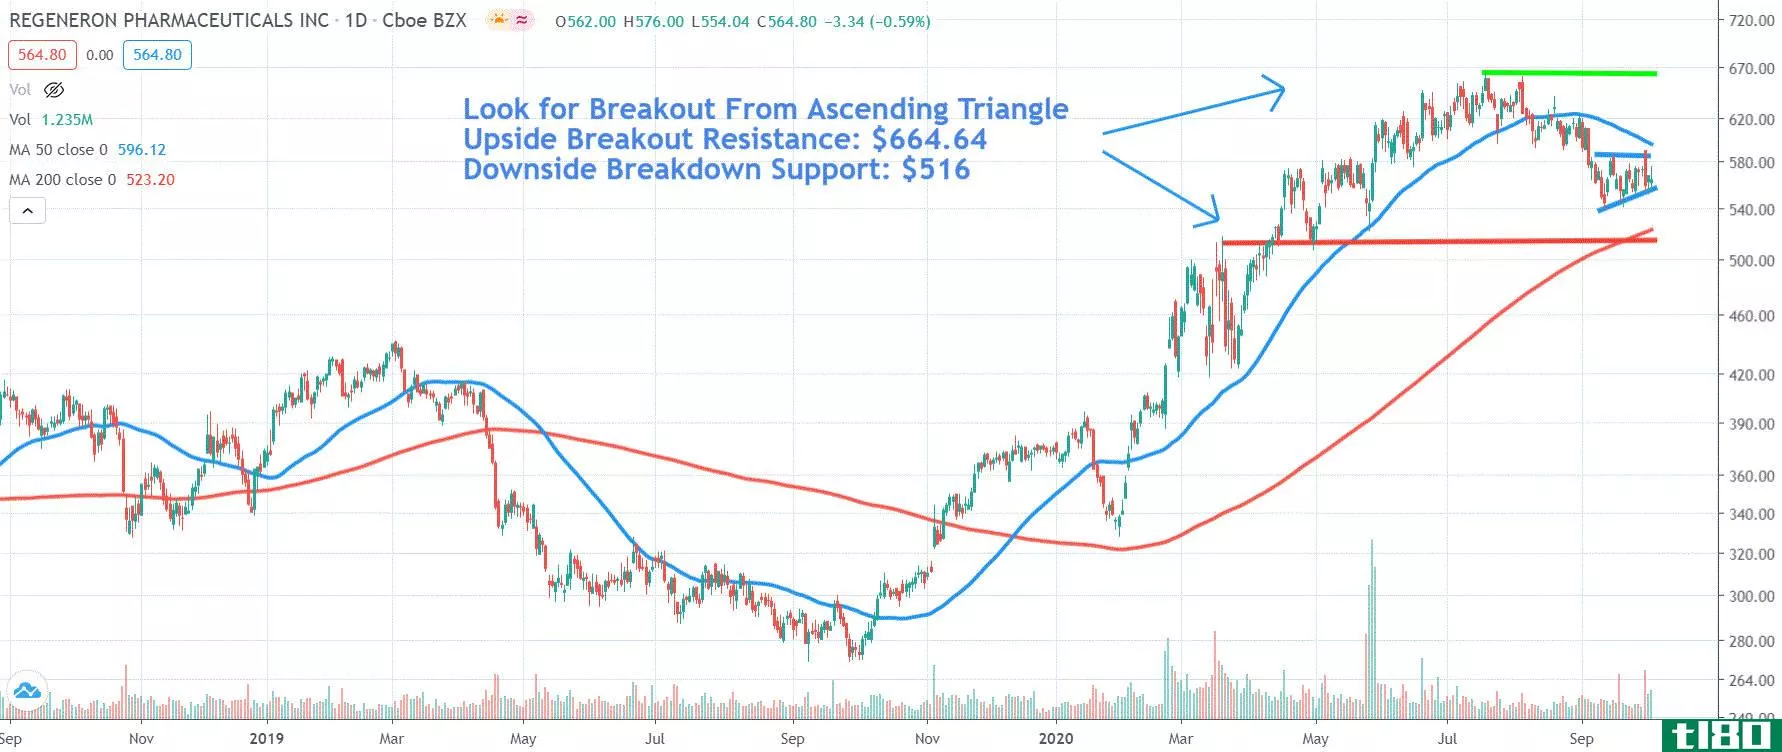 Chart depicting the share price of Regeneron Pharmaceuticals, Inc. (REGN)